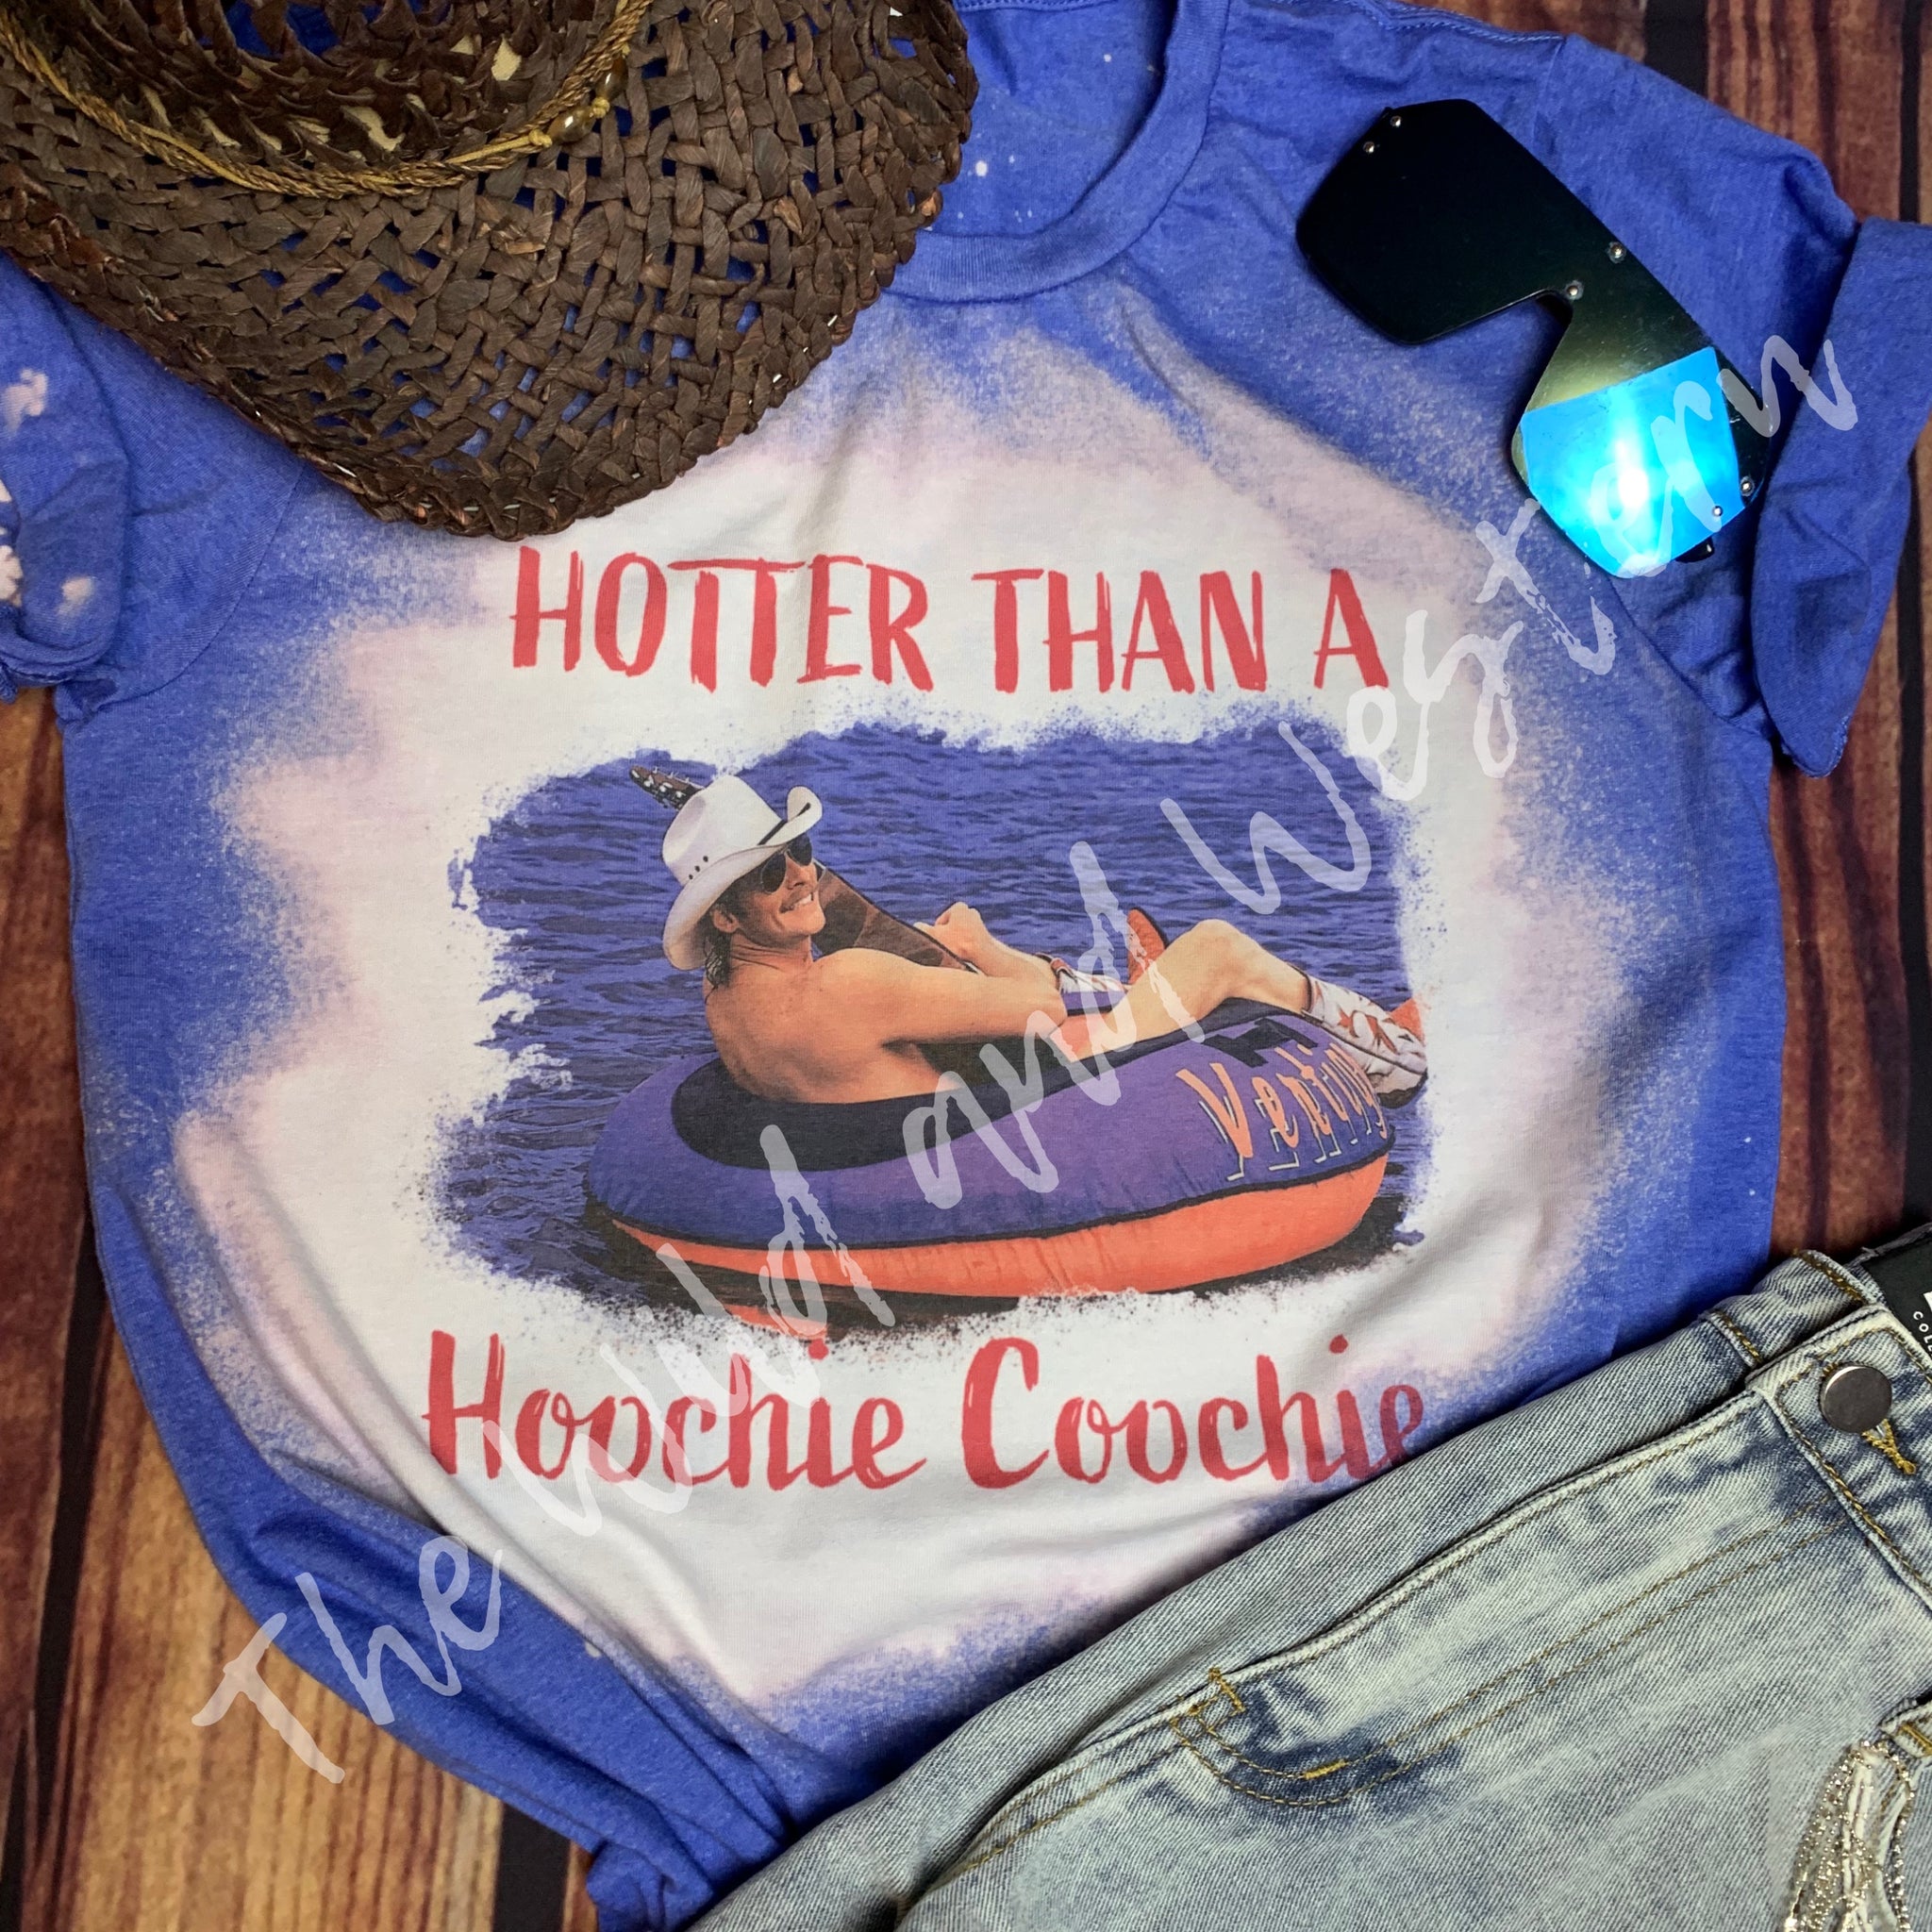 Hotter Than a Hoochie Coochie Graphic Tee